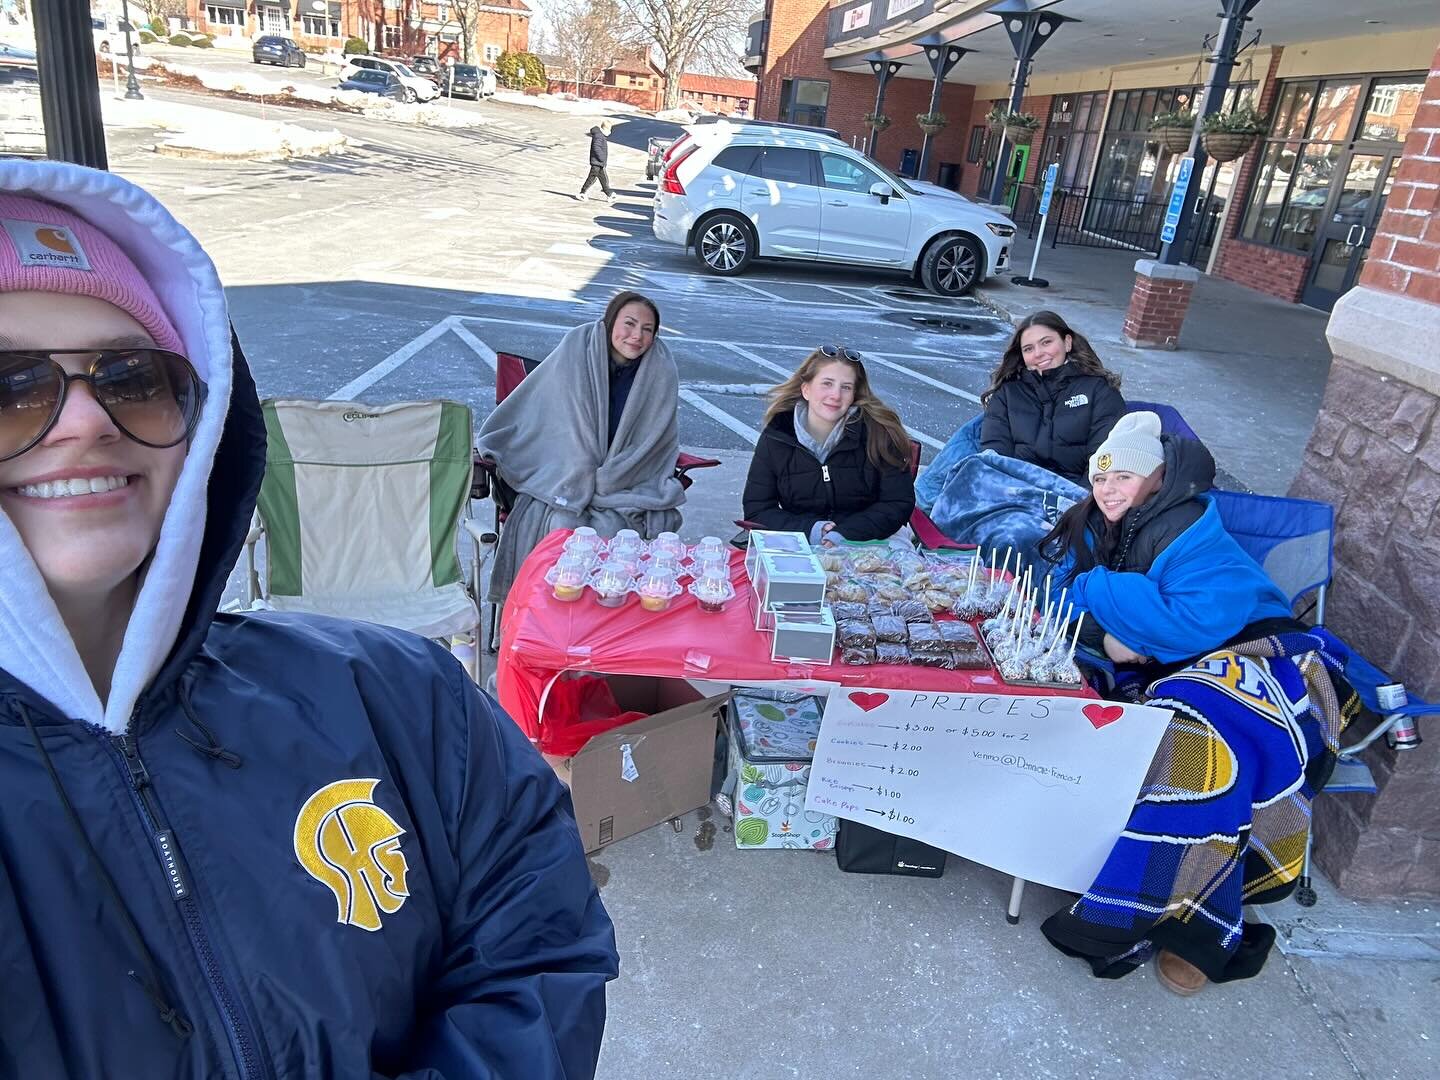 Come out to Fitzgerald&rsquo;s today. Girls Lax bake sale until 1pm. Please come and support!